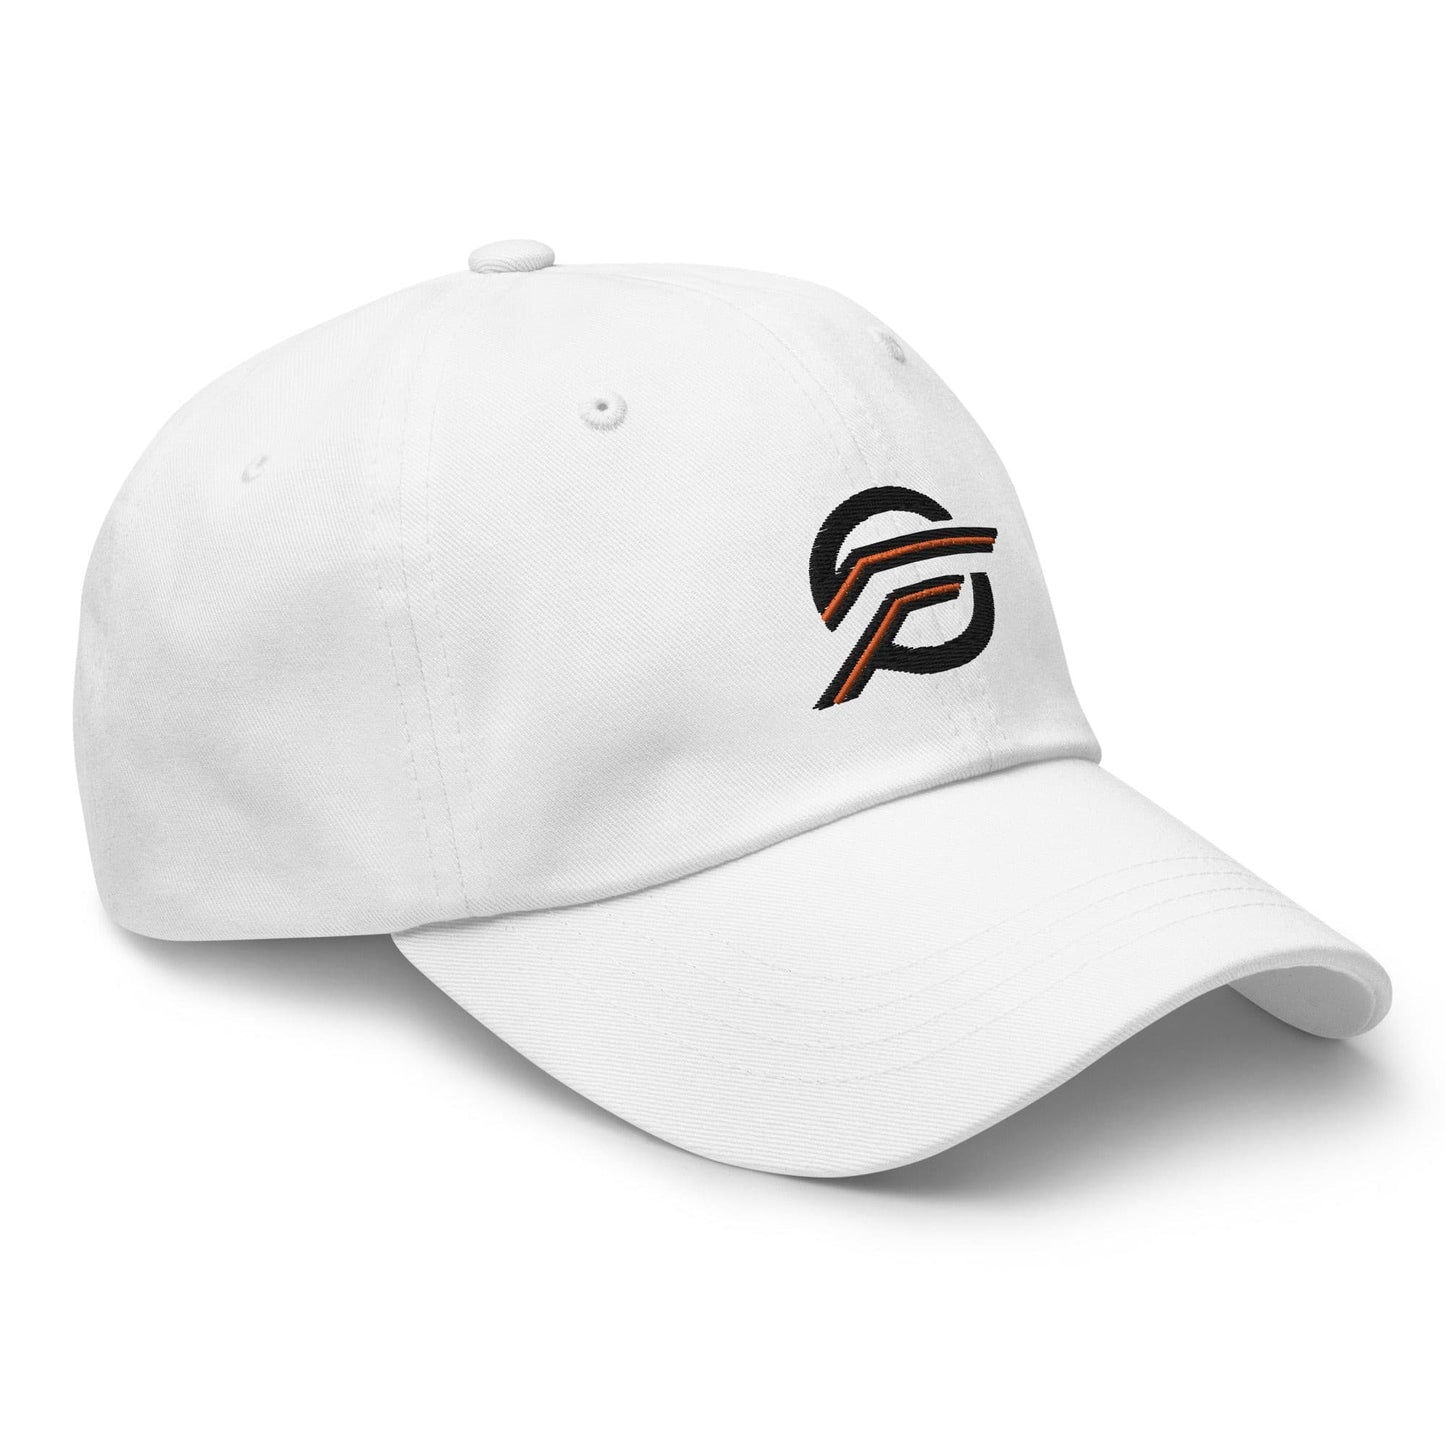 Embroidered logo Dad Hat White